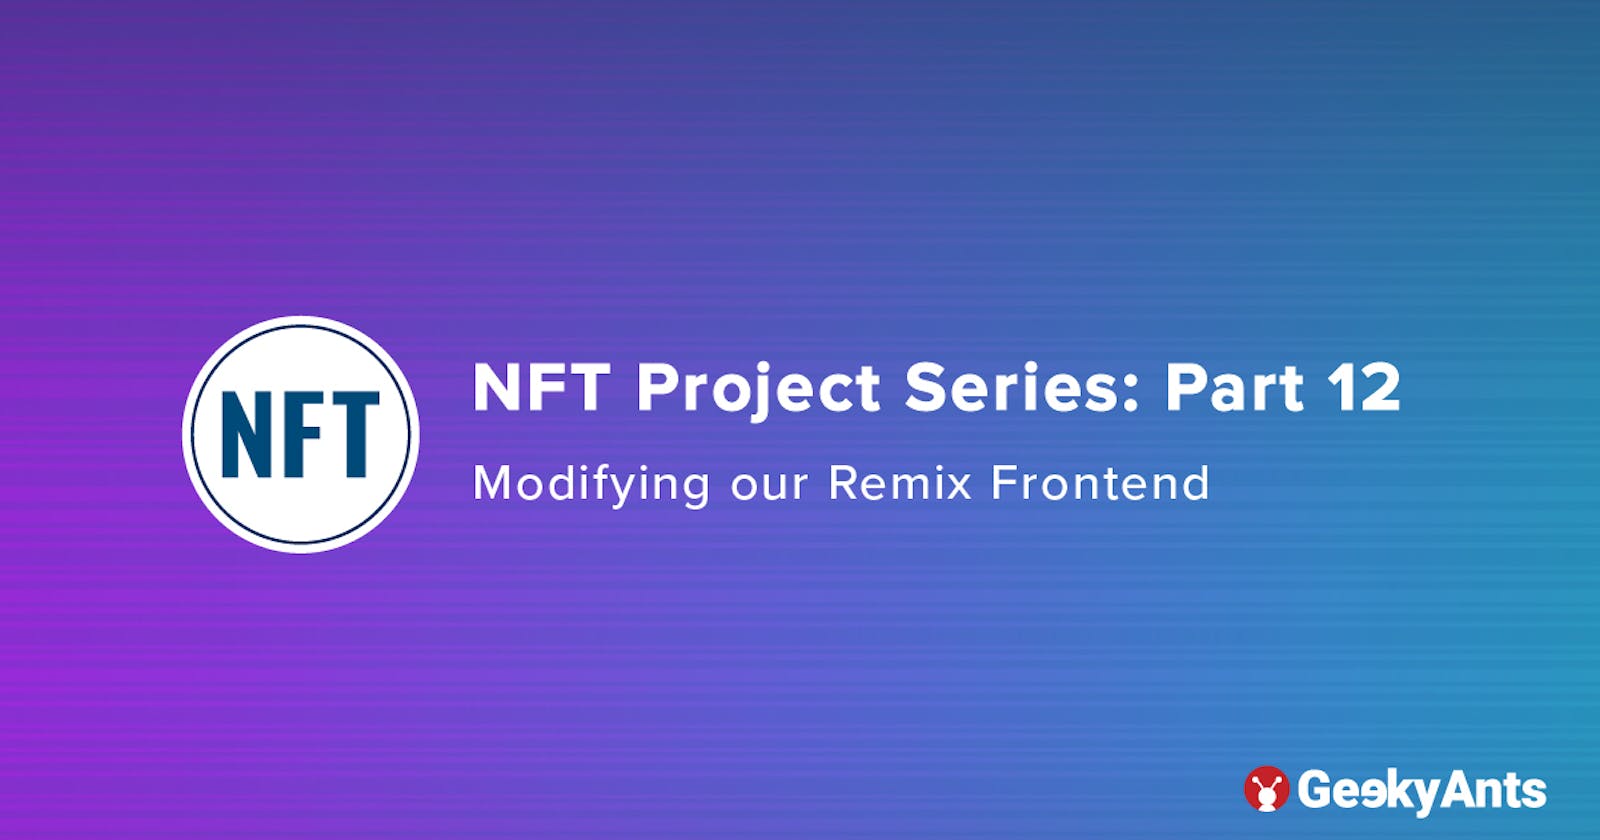 NFT Project Series Part 12: Modifying our Remix Frontend